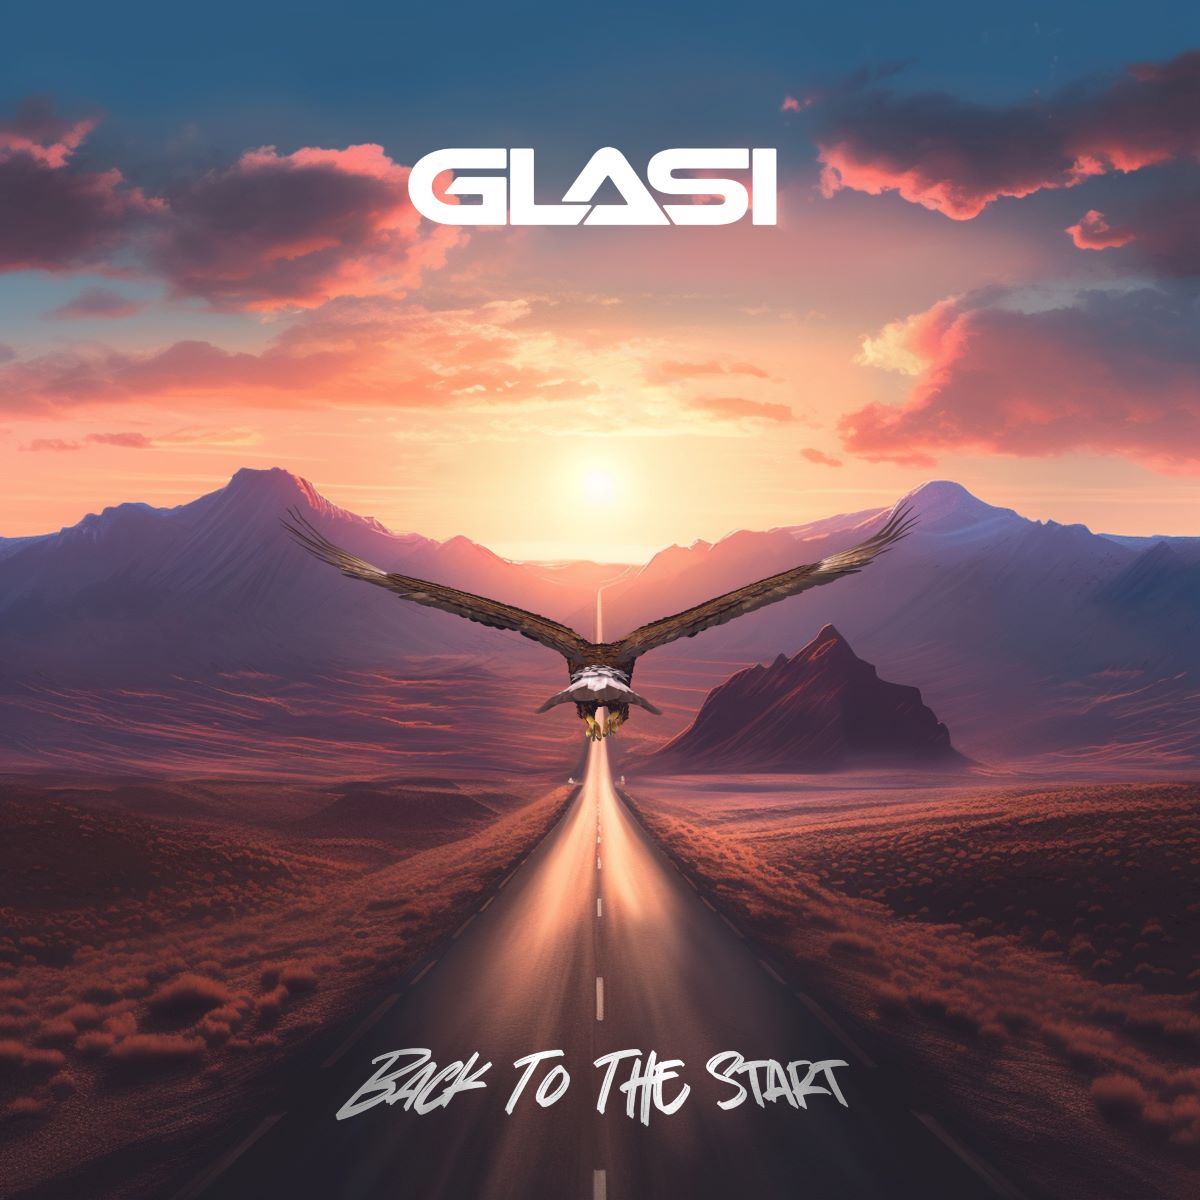 Glasi – Back To The Start